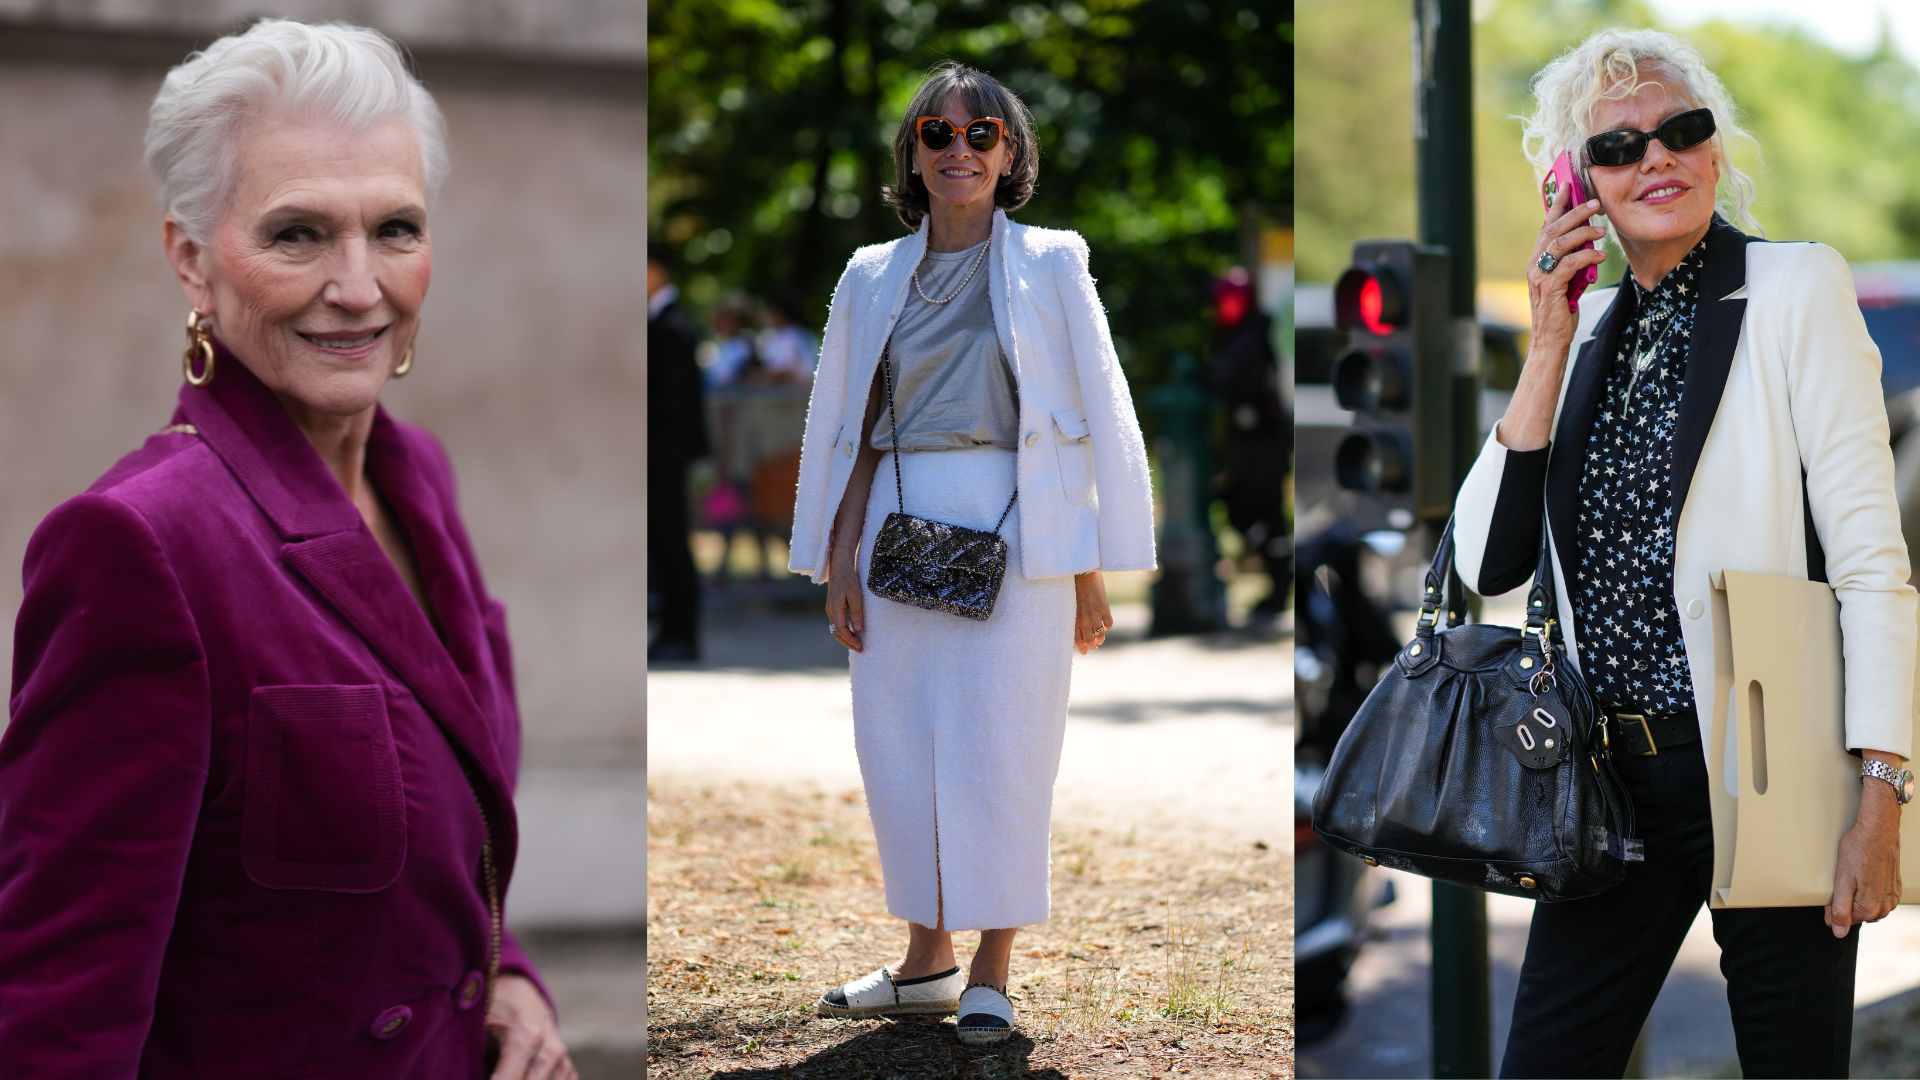 How to create an over 50 capsule wardrobe according to experts